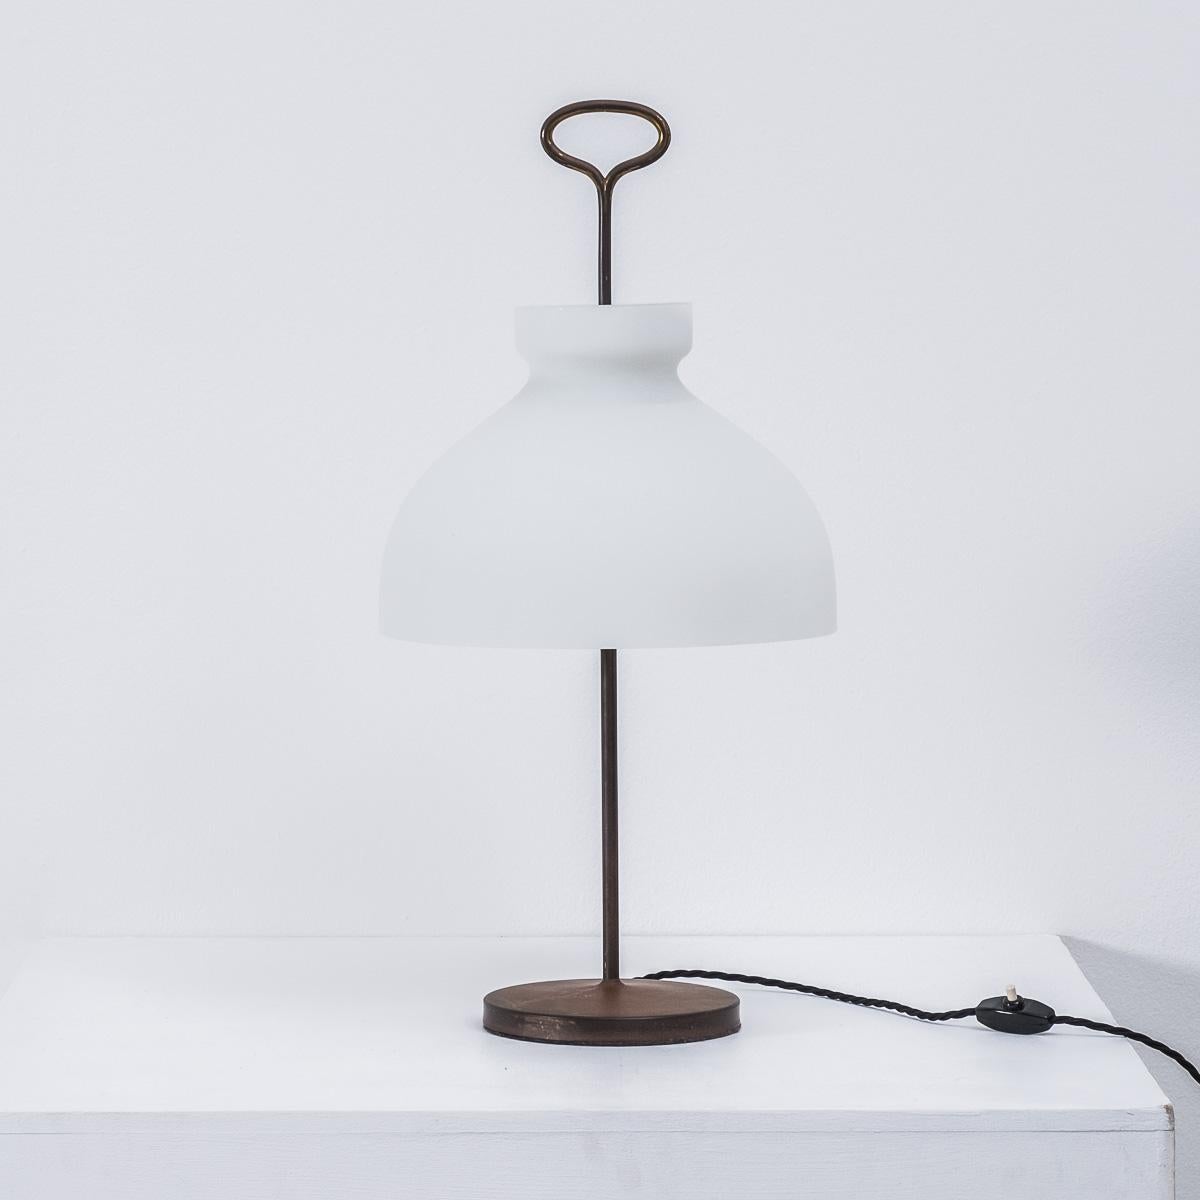 Rare Arenzano table lamp designed by architect, engineer and designer Ignazio Gardella. An éminence grise – Gardella was a powerhouse behind the scenes, founding Azucena, along with Luigi Caccia Dominioni in 1947. He came from a long dynasty of